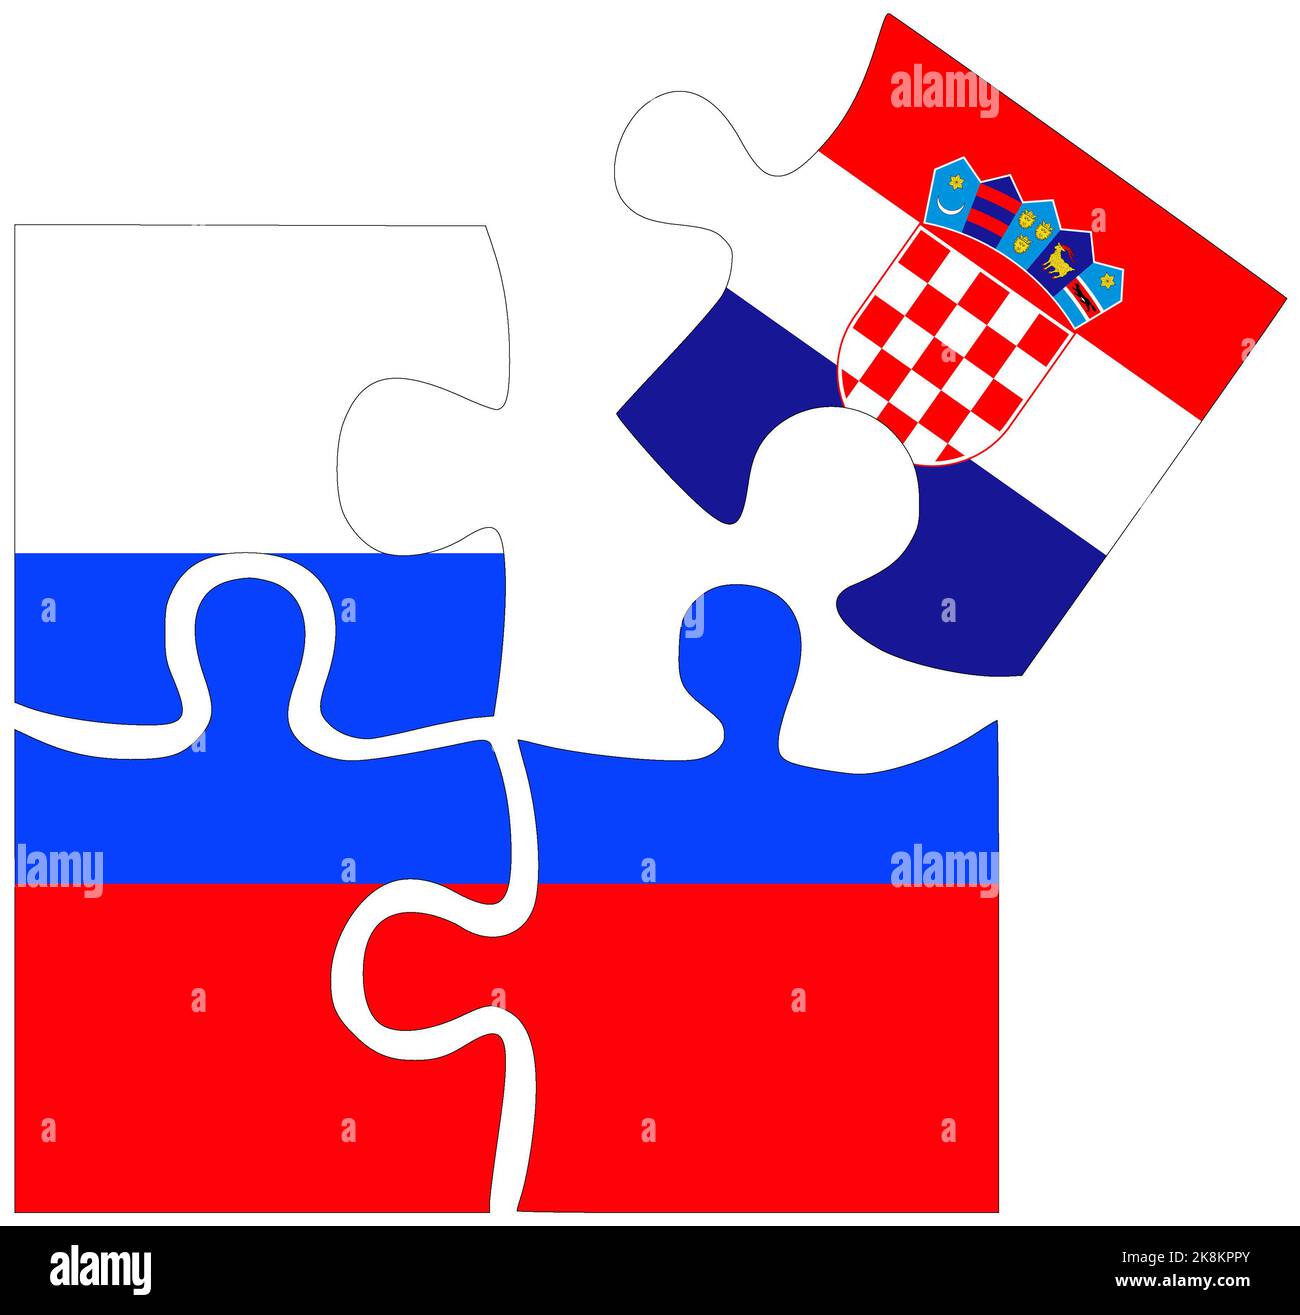 Russia - Croatia : puzzle shapes with flags, symbol of agreement or friendship Stock Photo